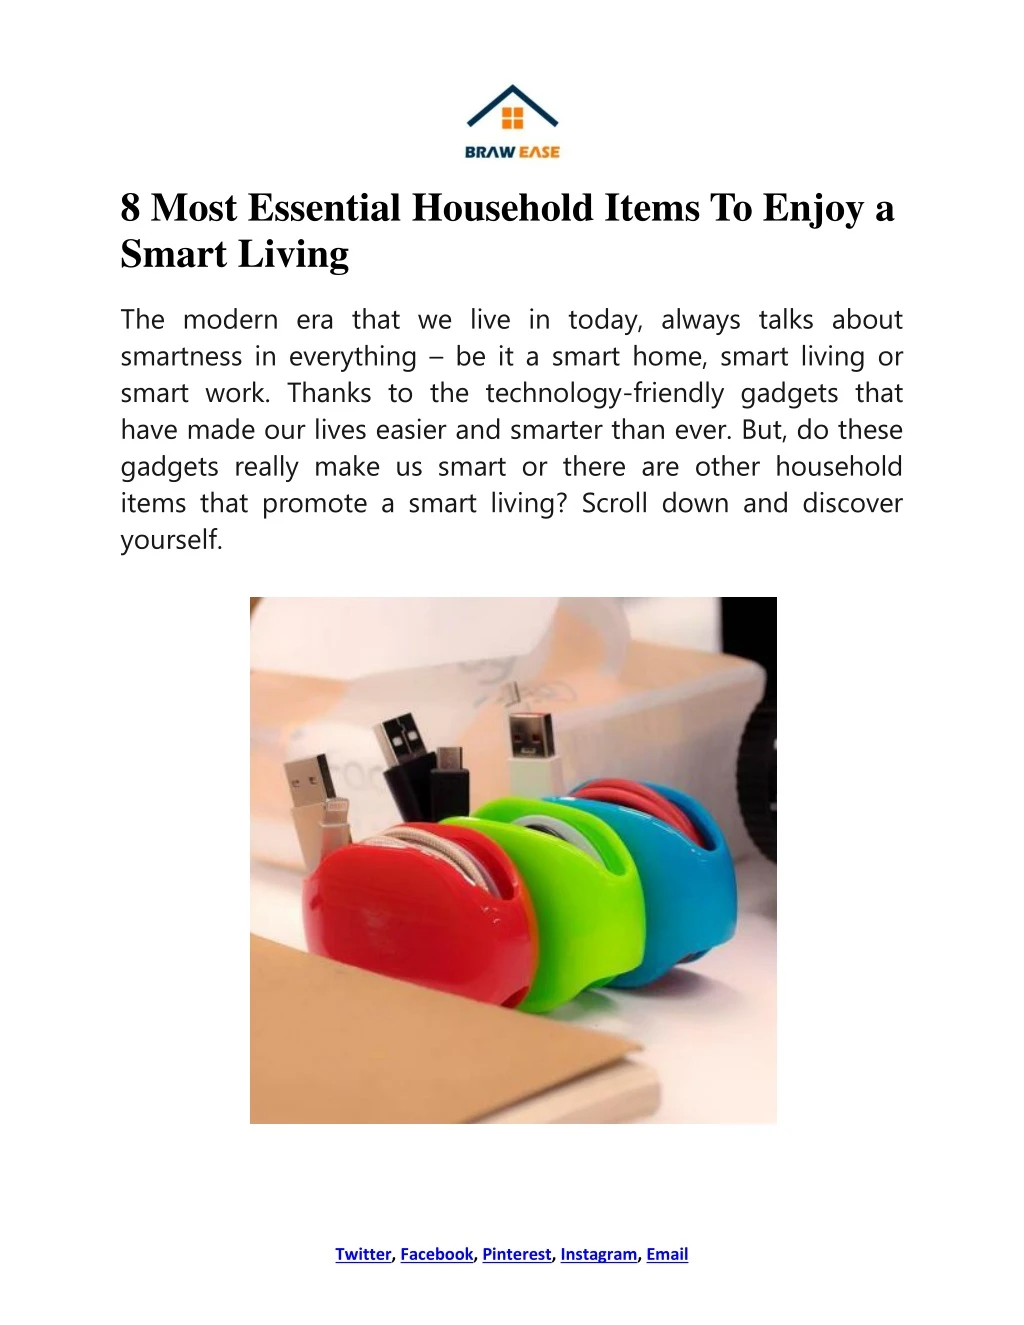 8 most essential household items to enjoy a smart